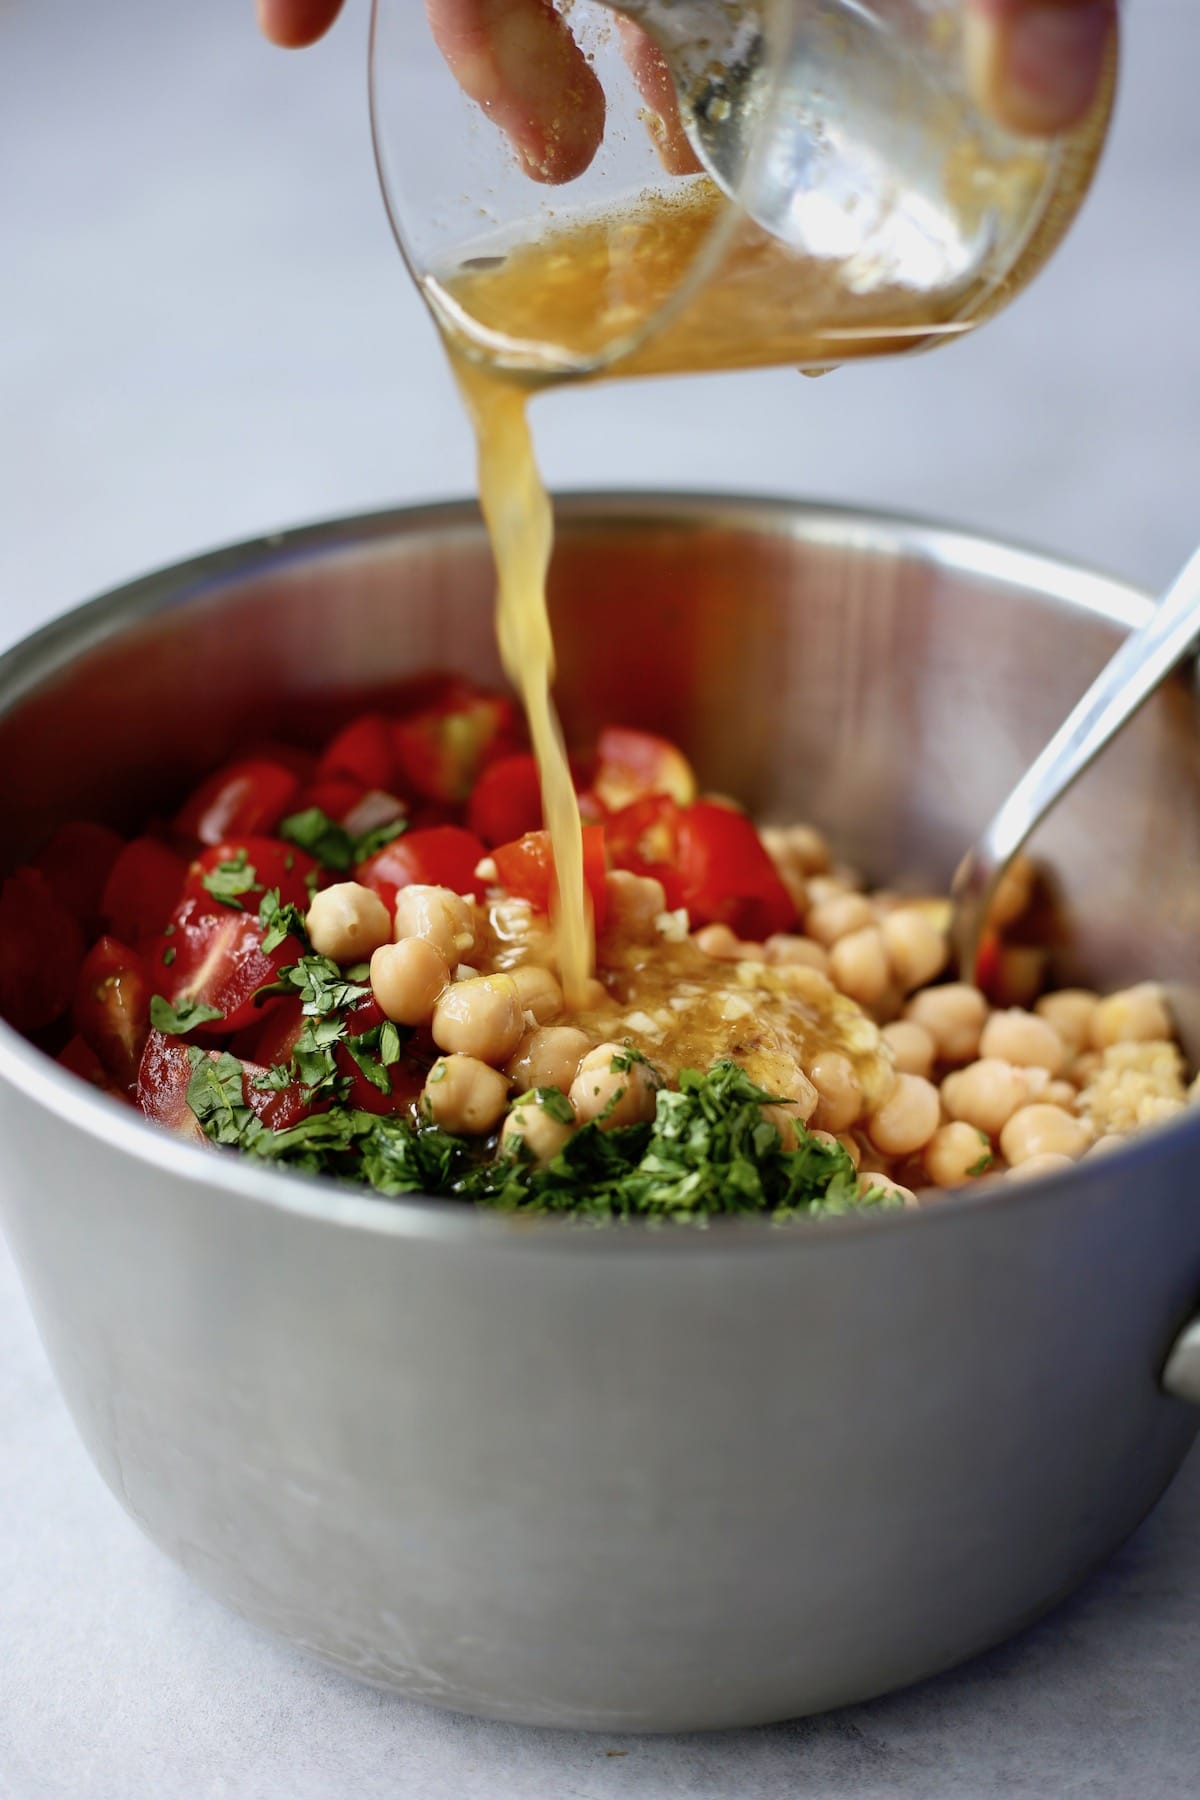 lemon dressing being poured over a mixture of quinoa, chickpeas, tomatoes and cilantro